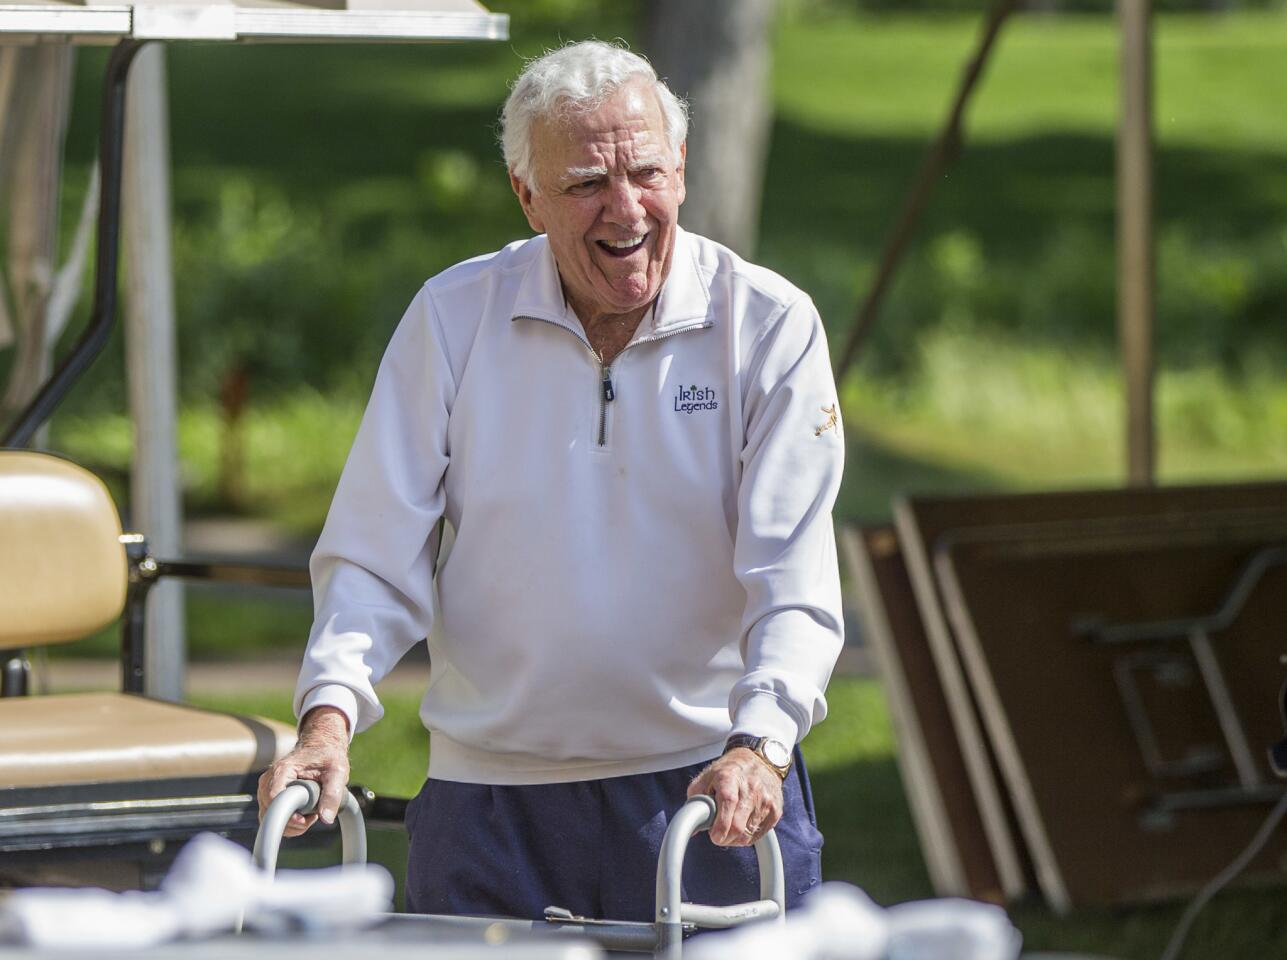 Former Notre Dame football coach Ara Parseghian makes his way to an interview area during the Kelly Cares Foundation Golf Invitational at Lost Dunes Golf Club in Bridgman, Mich., on June 13, 2016.